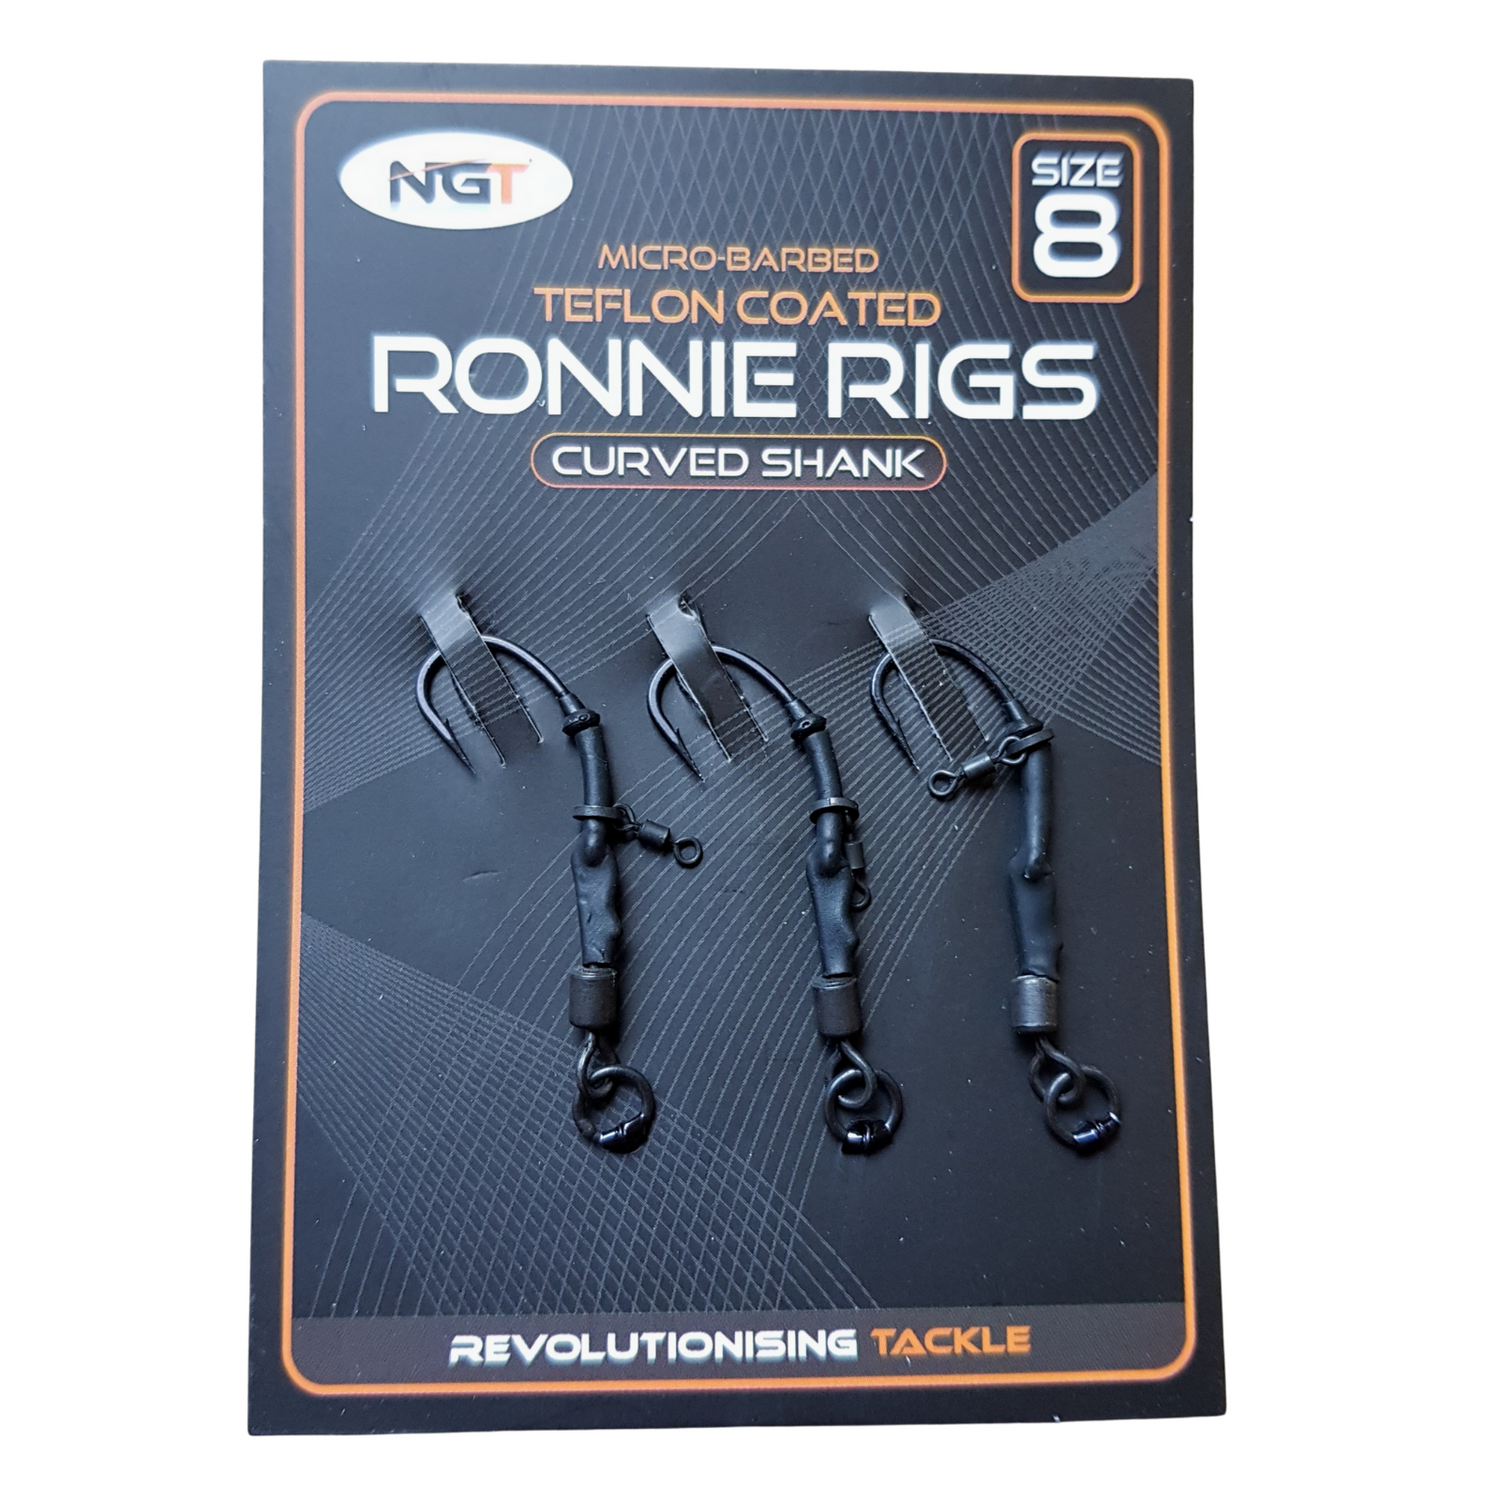 NGT Teflon Coated Ronnie Rigs Size 8 x 3